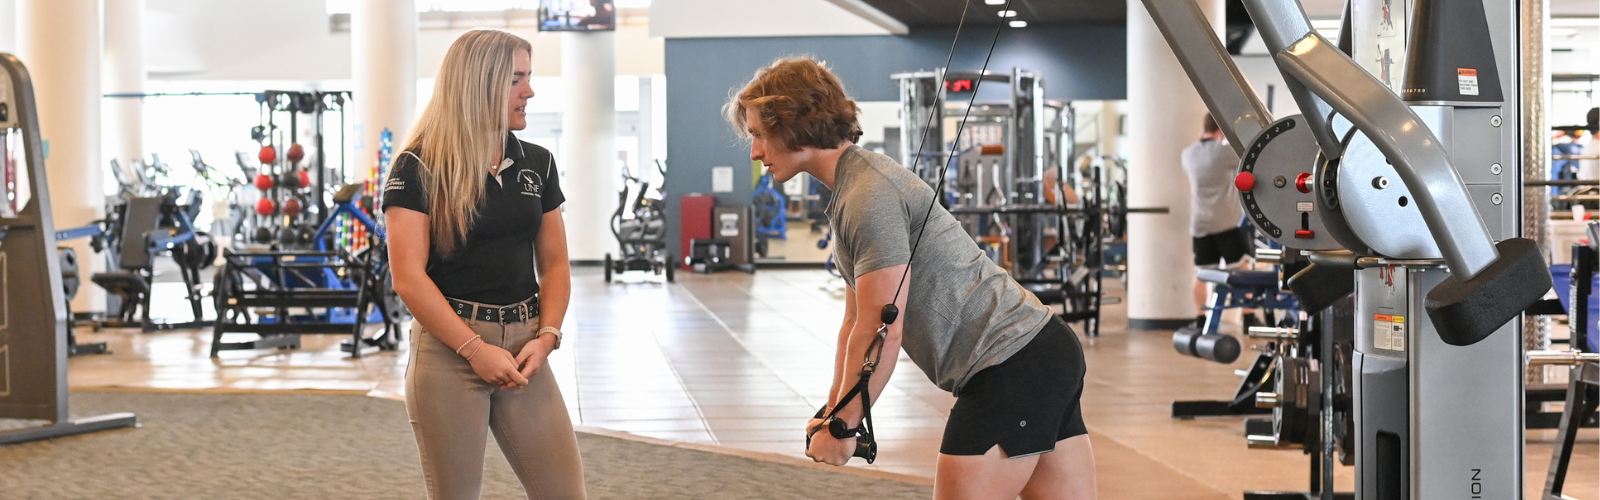 unf athletic trainer coaching student on weight machine